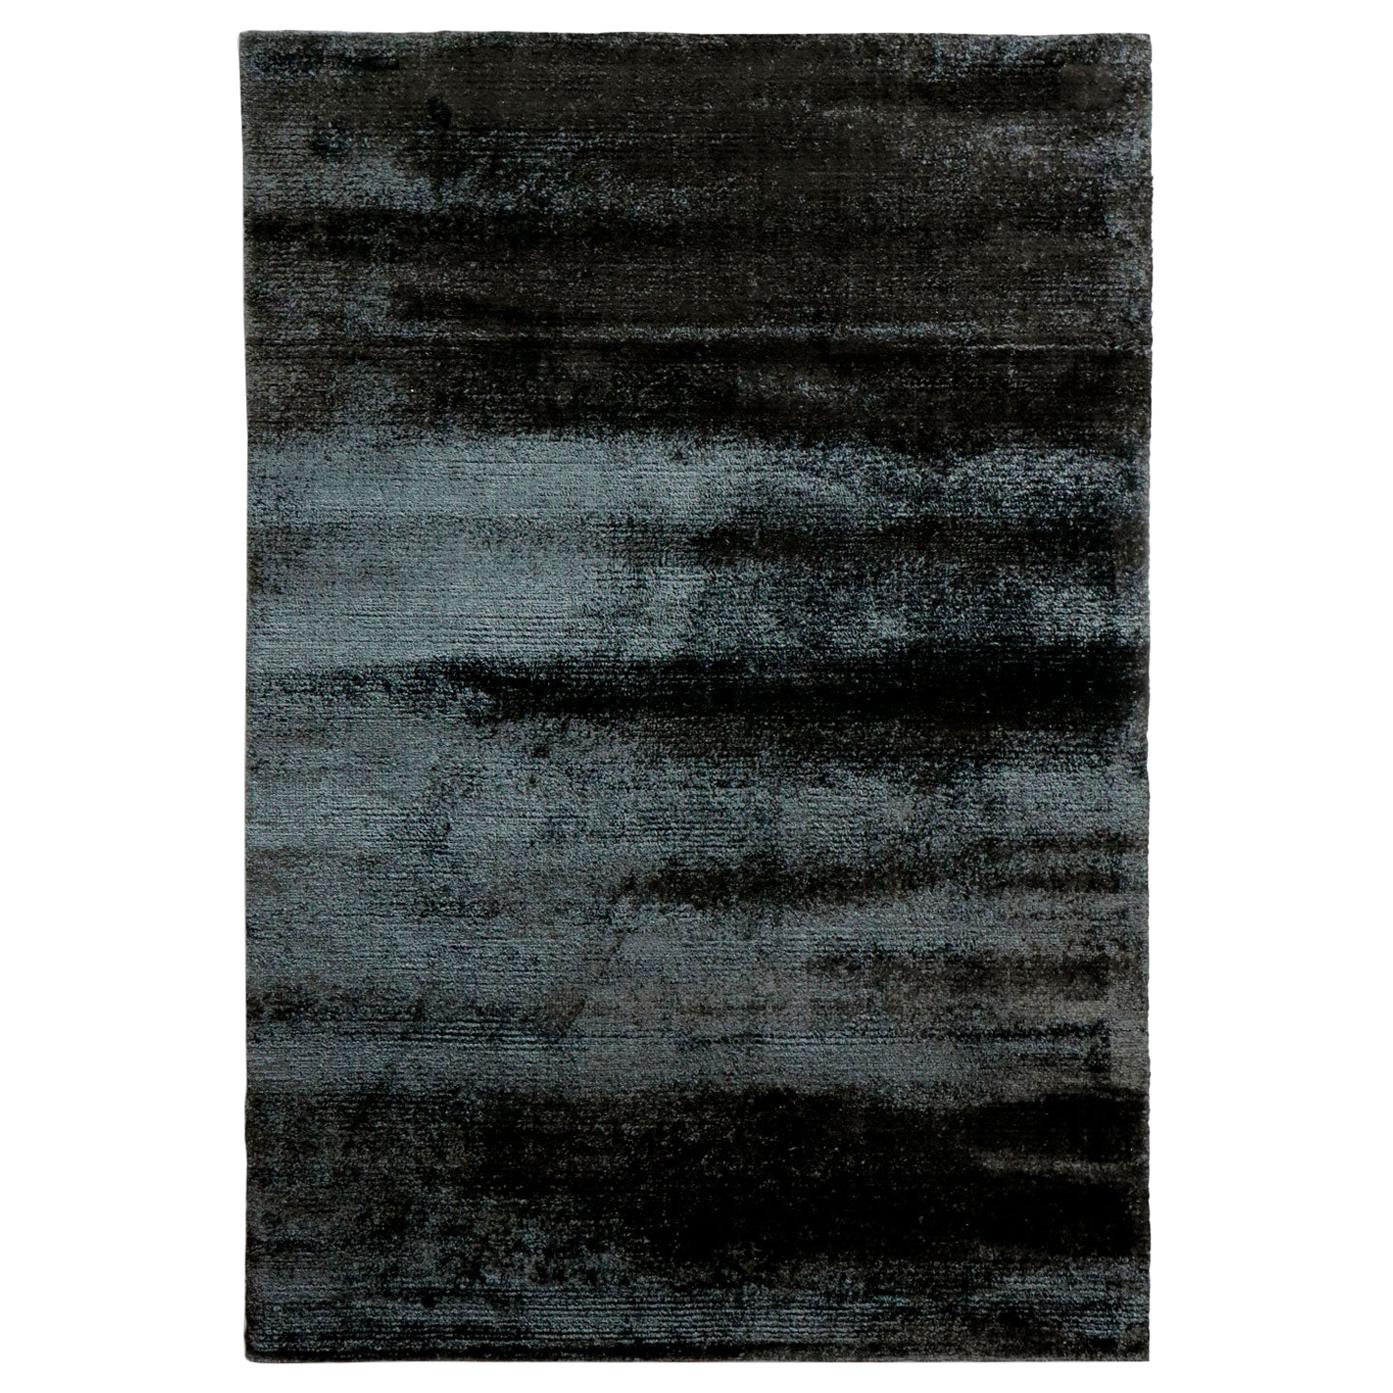 21st Cent Iconic Signature Black Rug by Deanna Comellini In Stock 200x300 cm